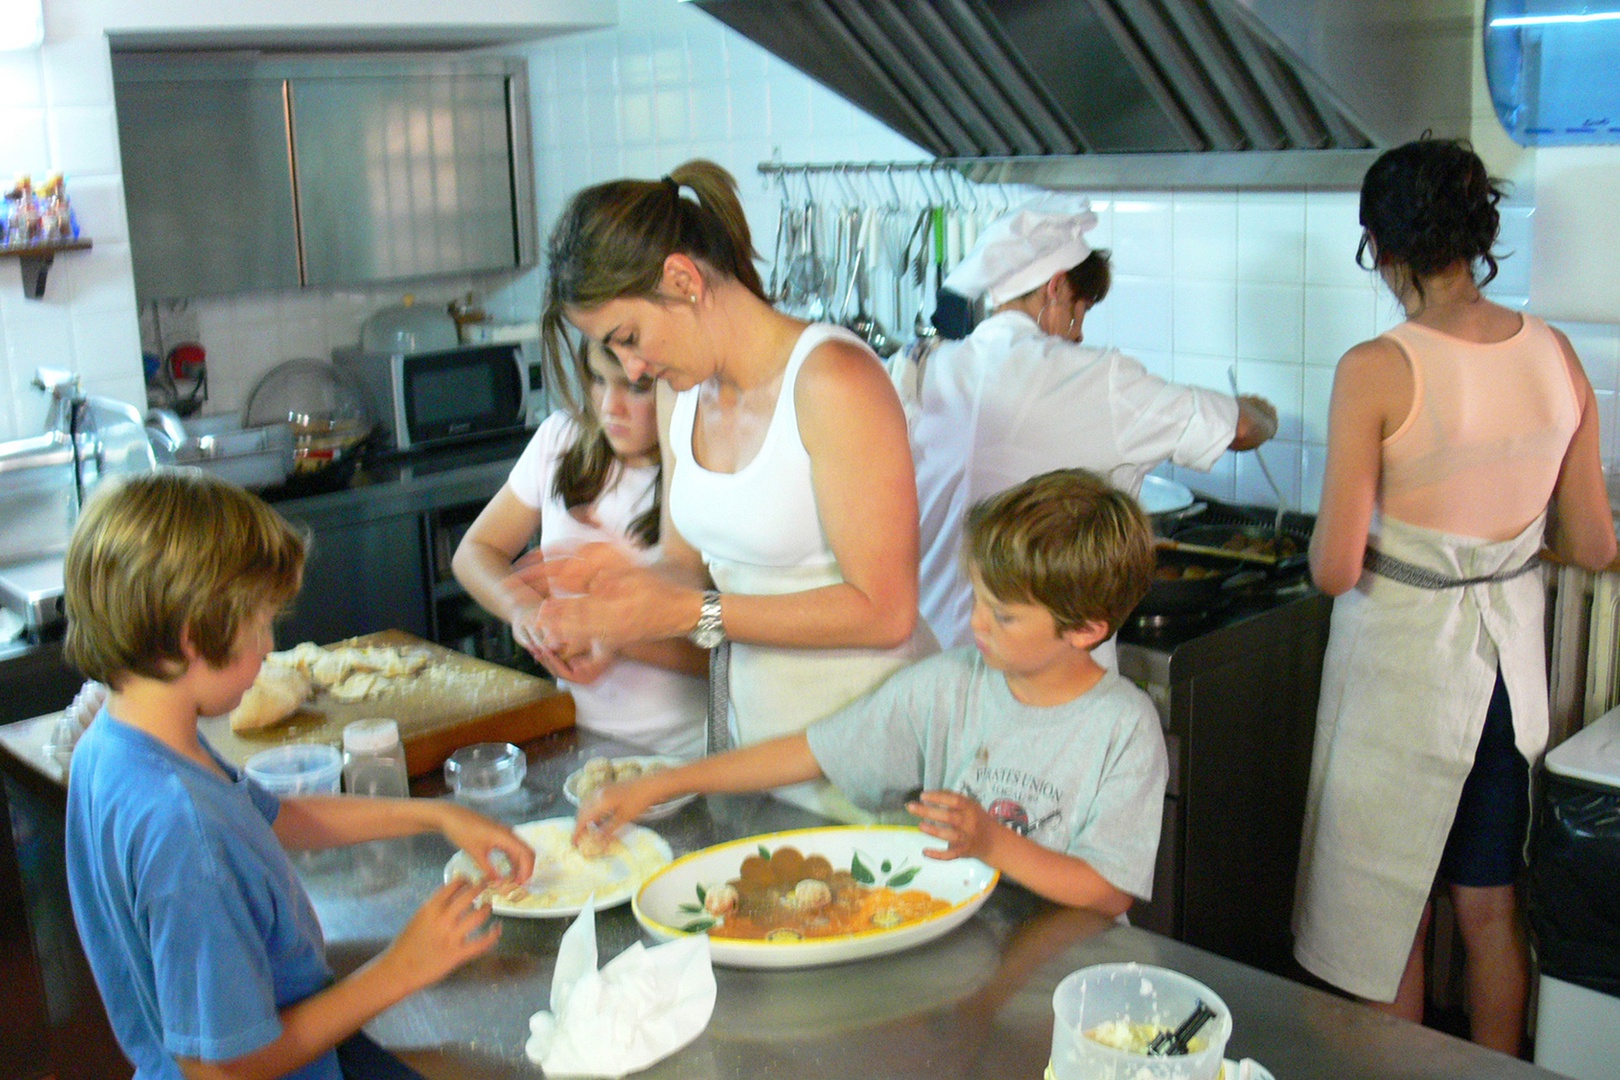 Cooking lessons are offered with advance arrangement.